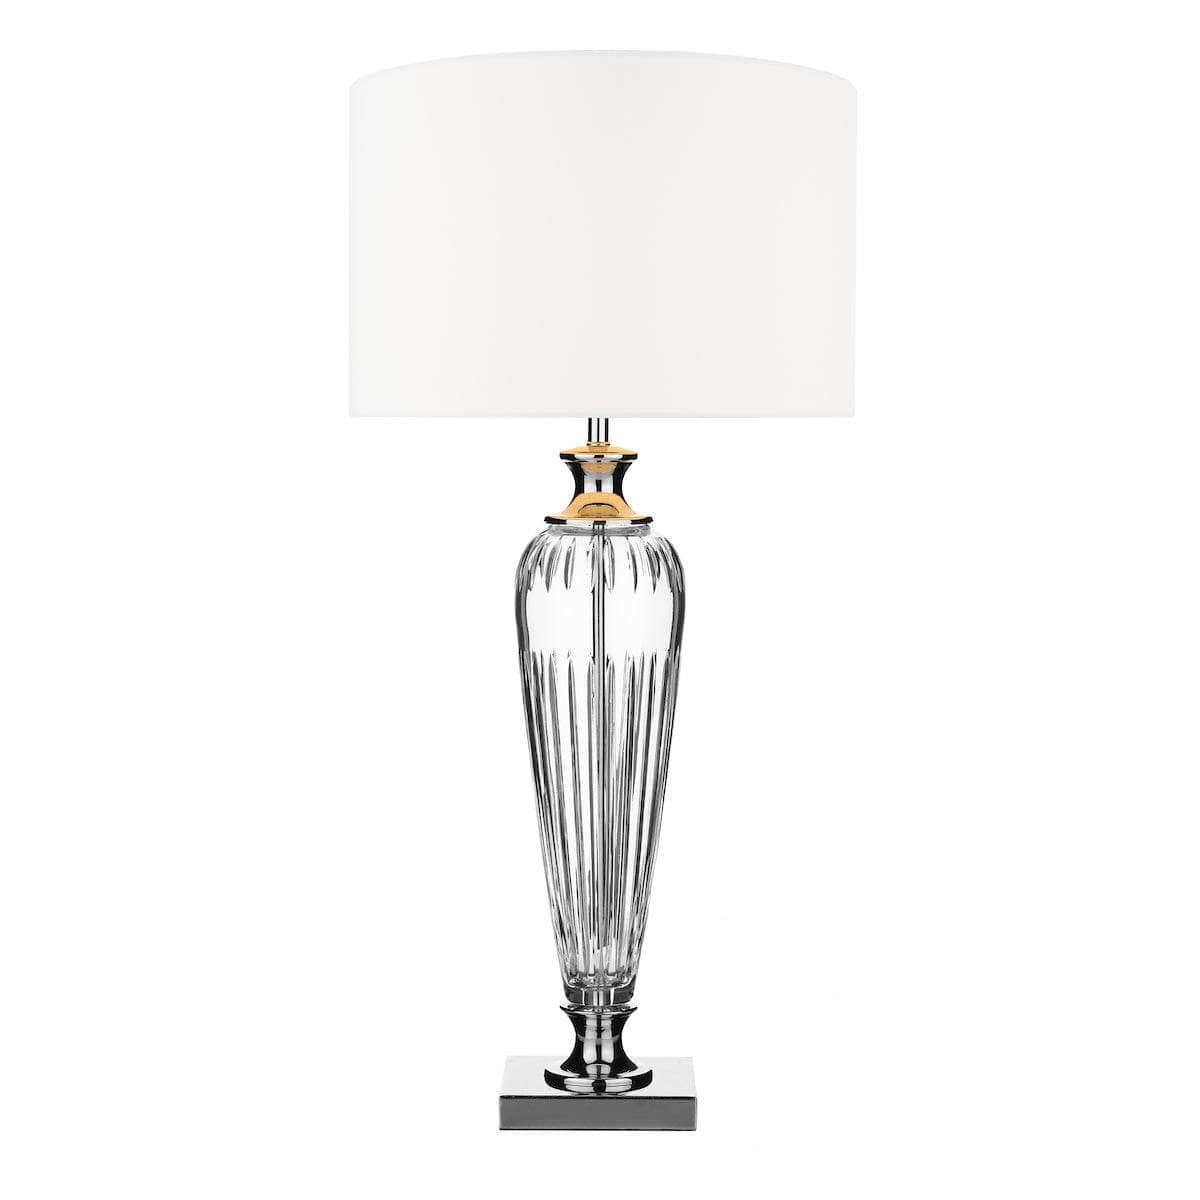 Lights  -  Marchena Glass Table Lamp  -  50085103